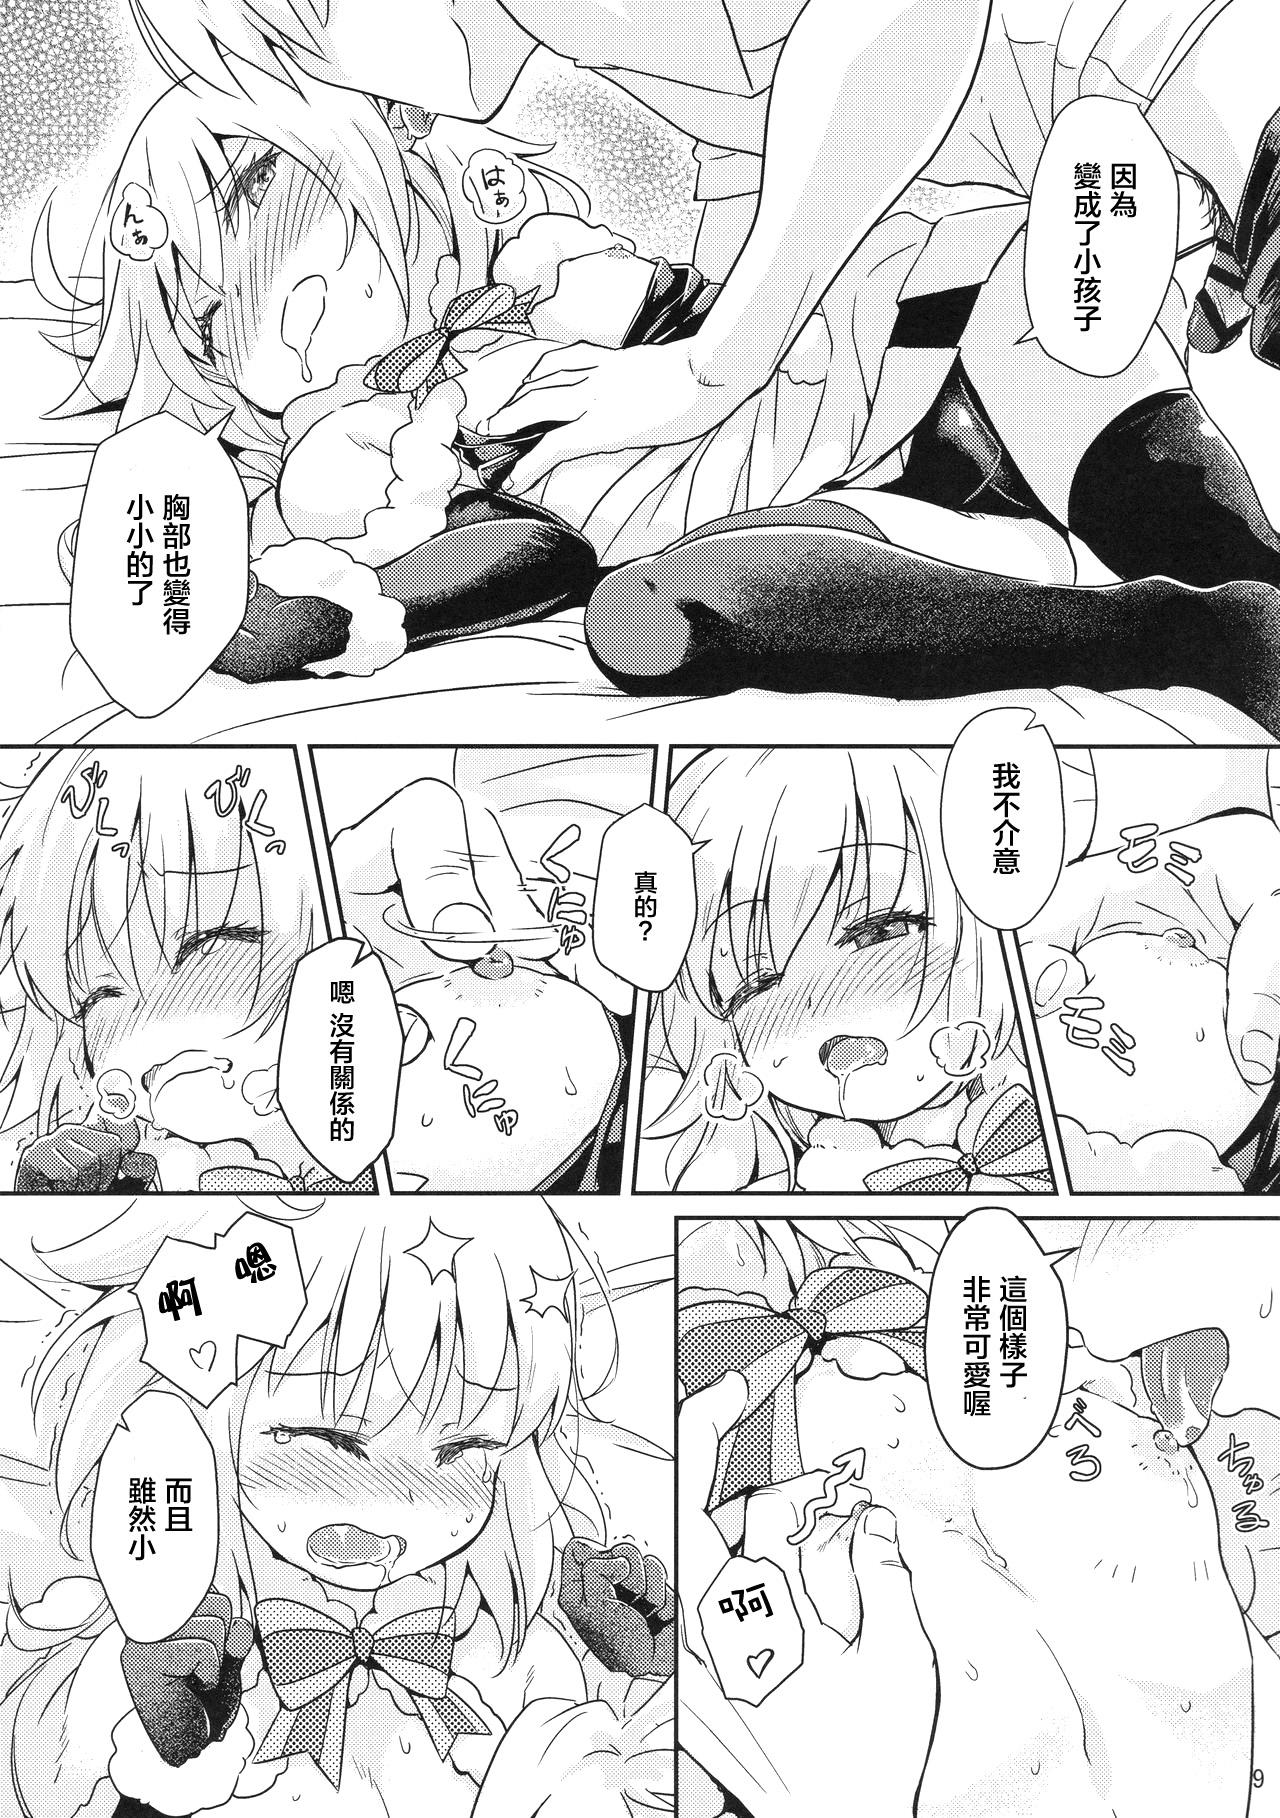 Gapes Gaping Asshole Jeanne Lily wa Yoiko? - Fate grand order Tattooed - Page 11